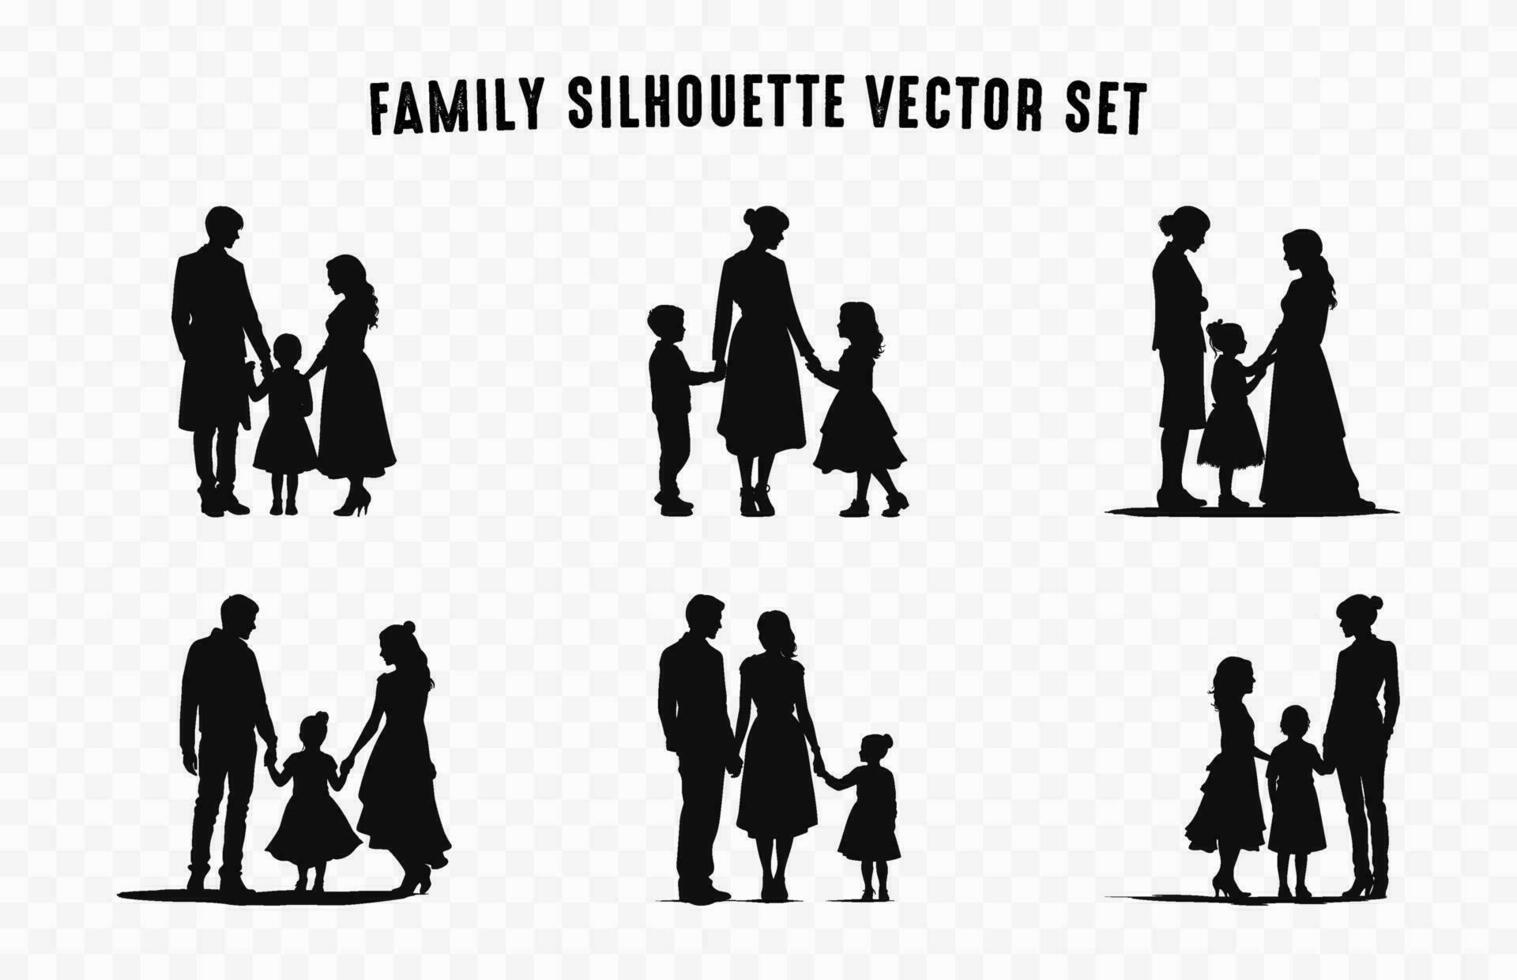 Happy Family Silhouettes clipart Set, Family groups black vector Bundle